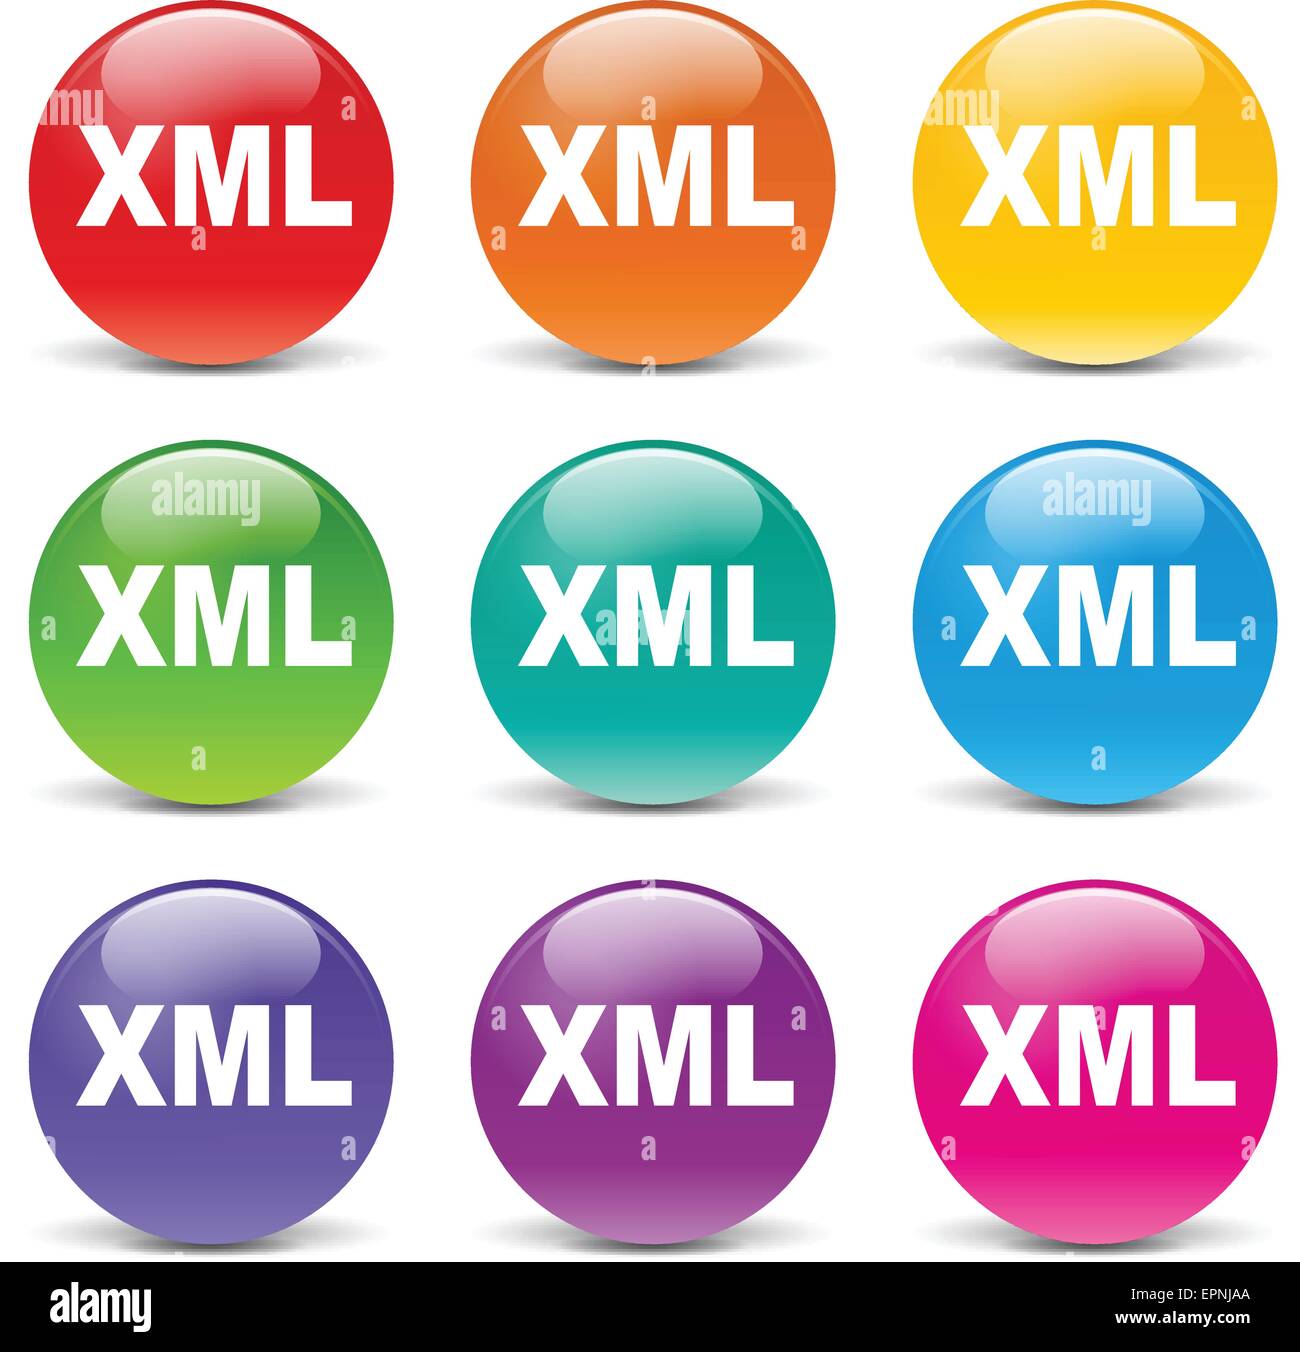 collection of icons of different colors for xml Stock Vector